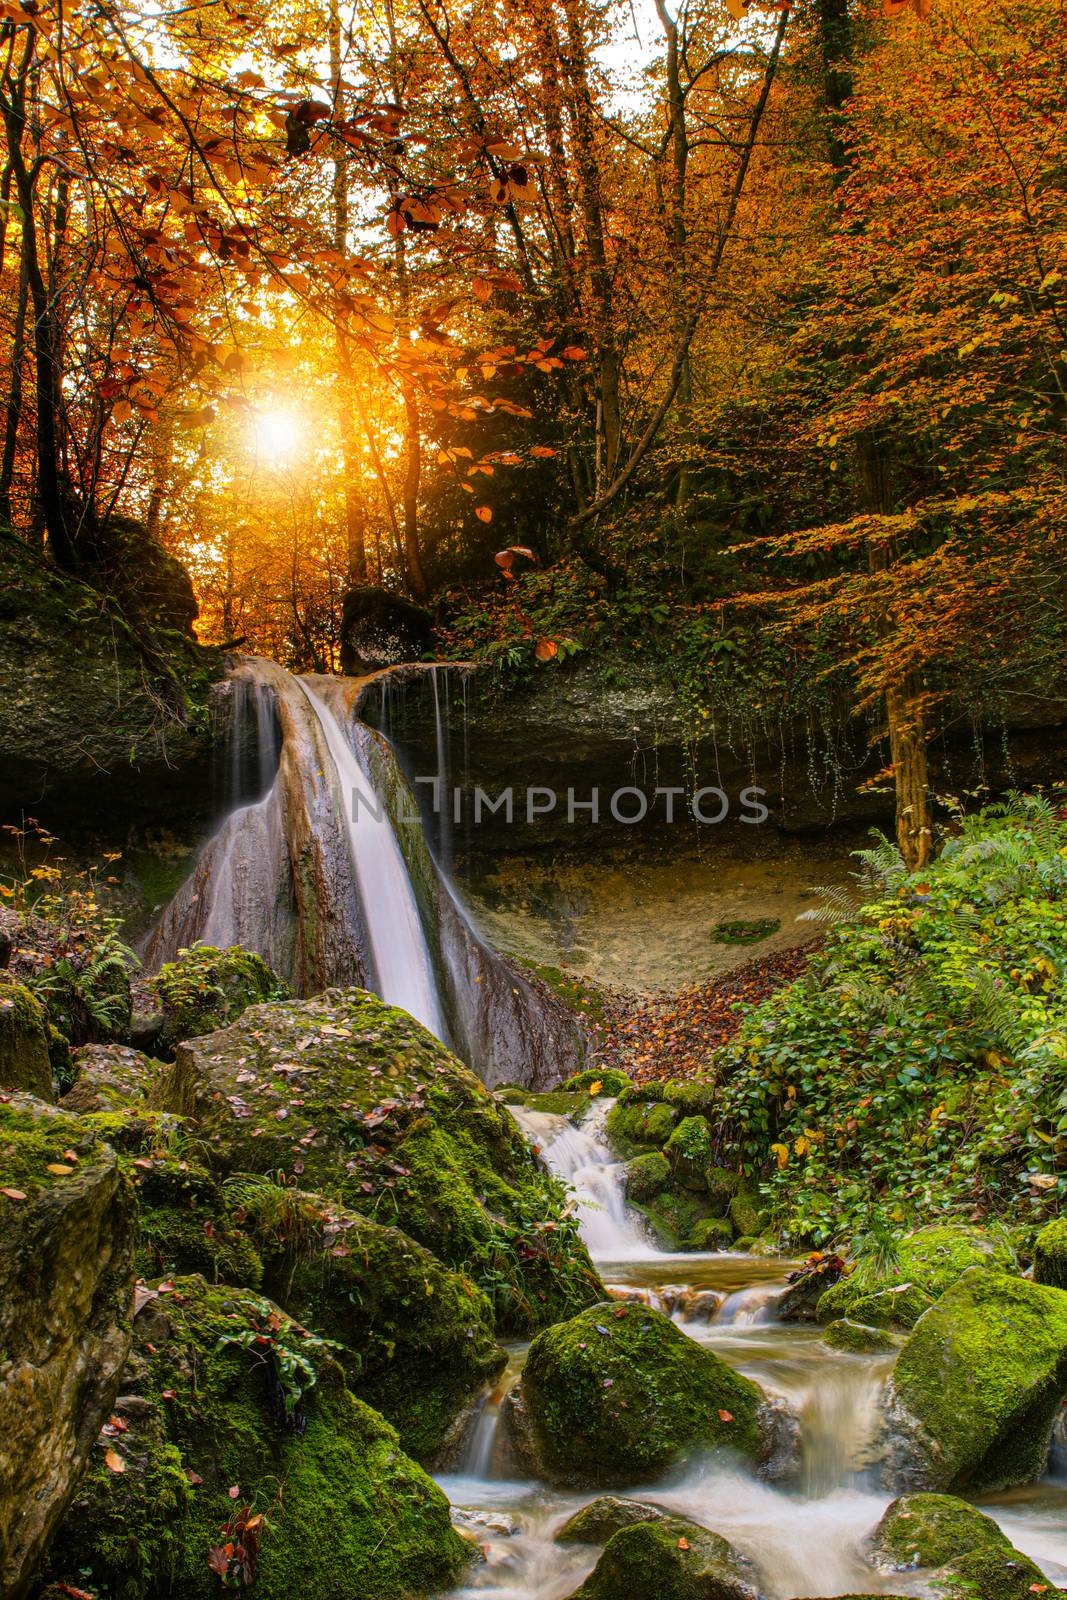 Waterfall in autumn with orange and yellow colors. Running clear, cold water in a forrest during autumn. by PeterHofstetter